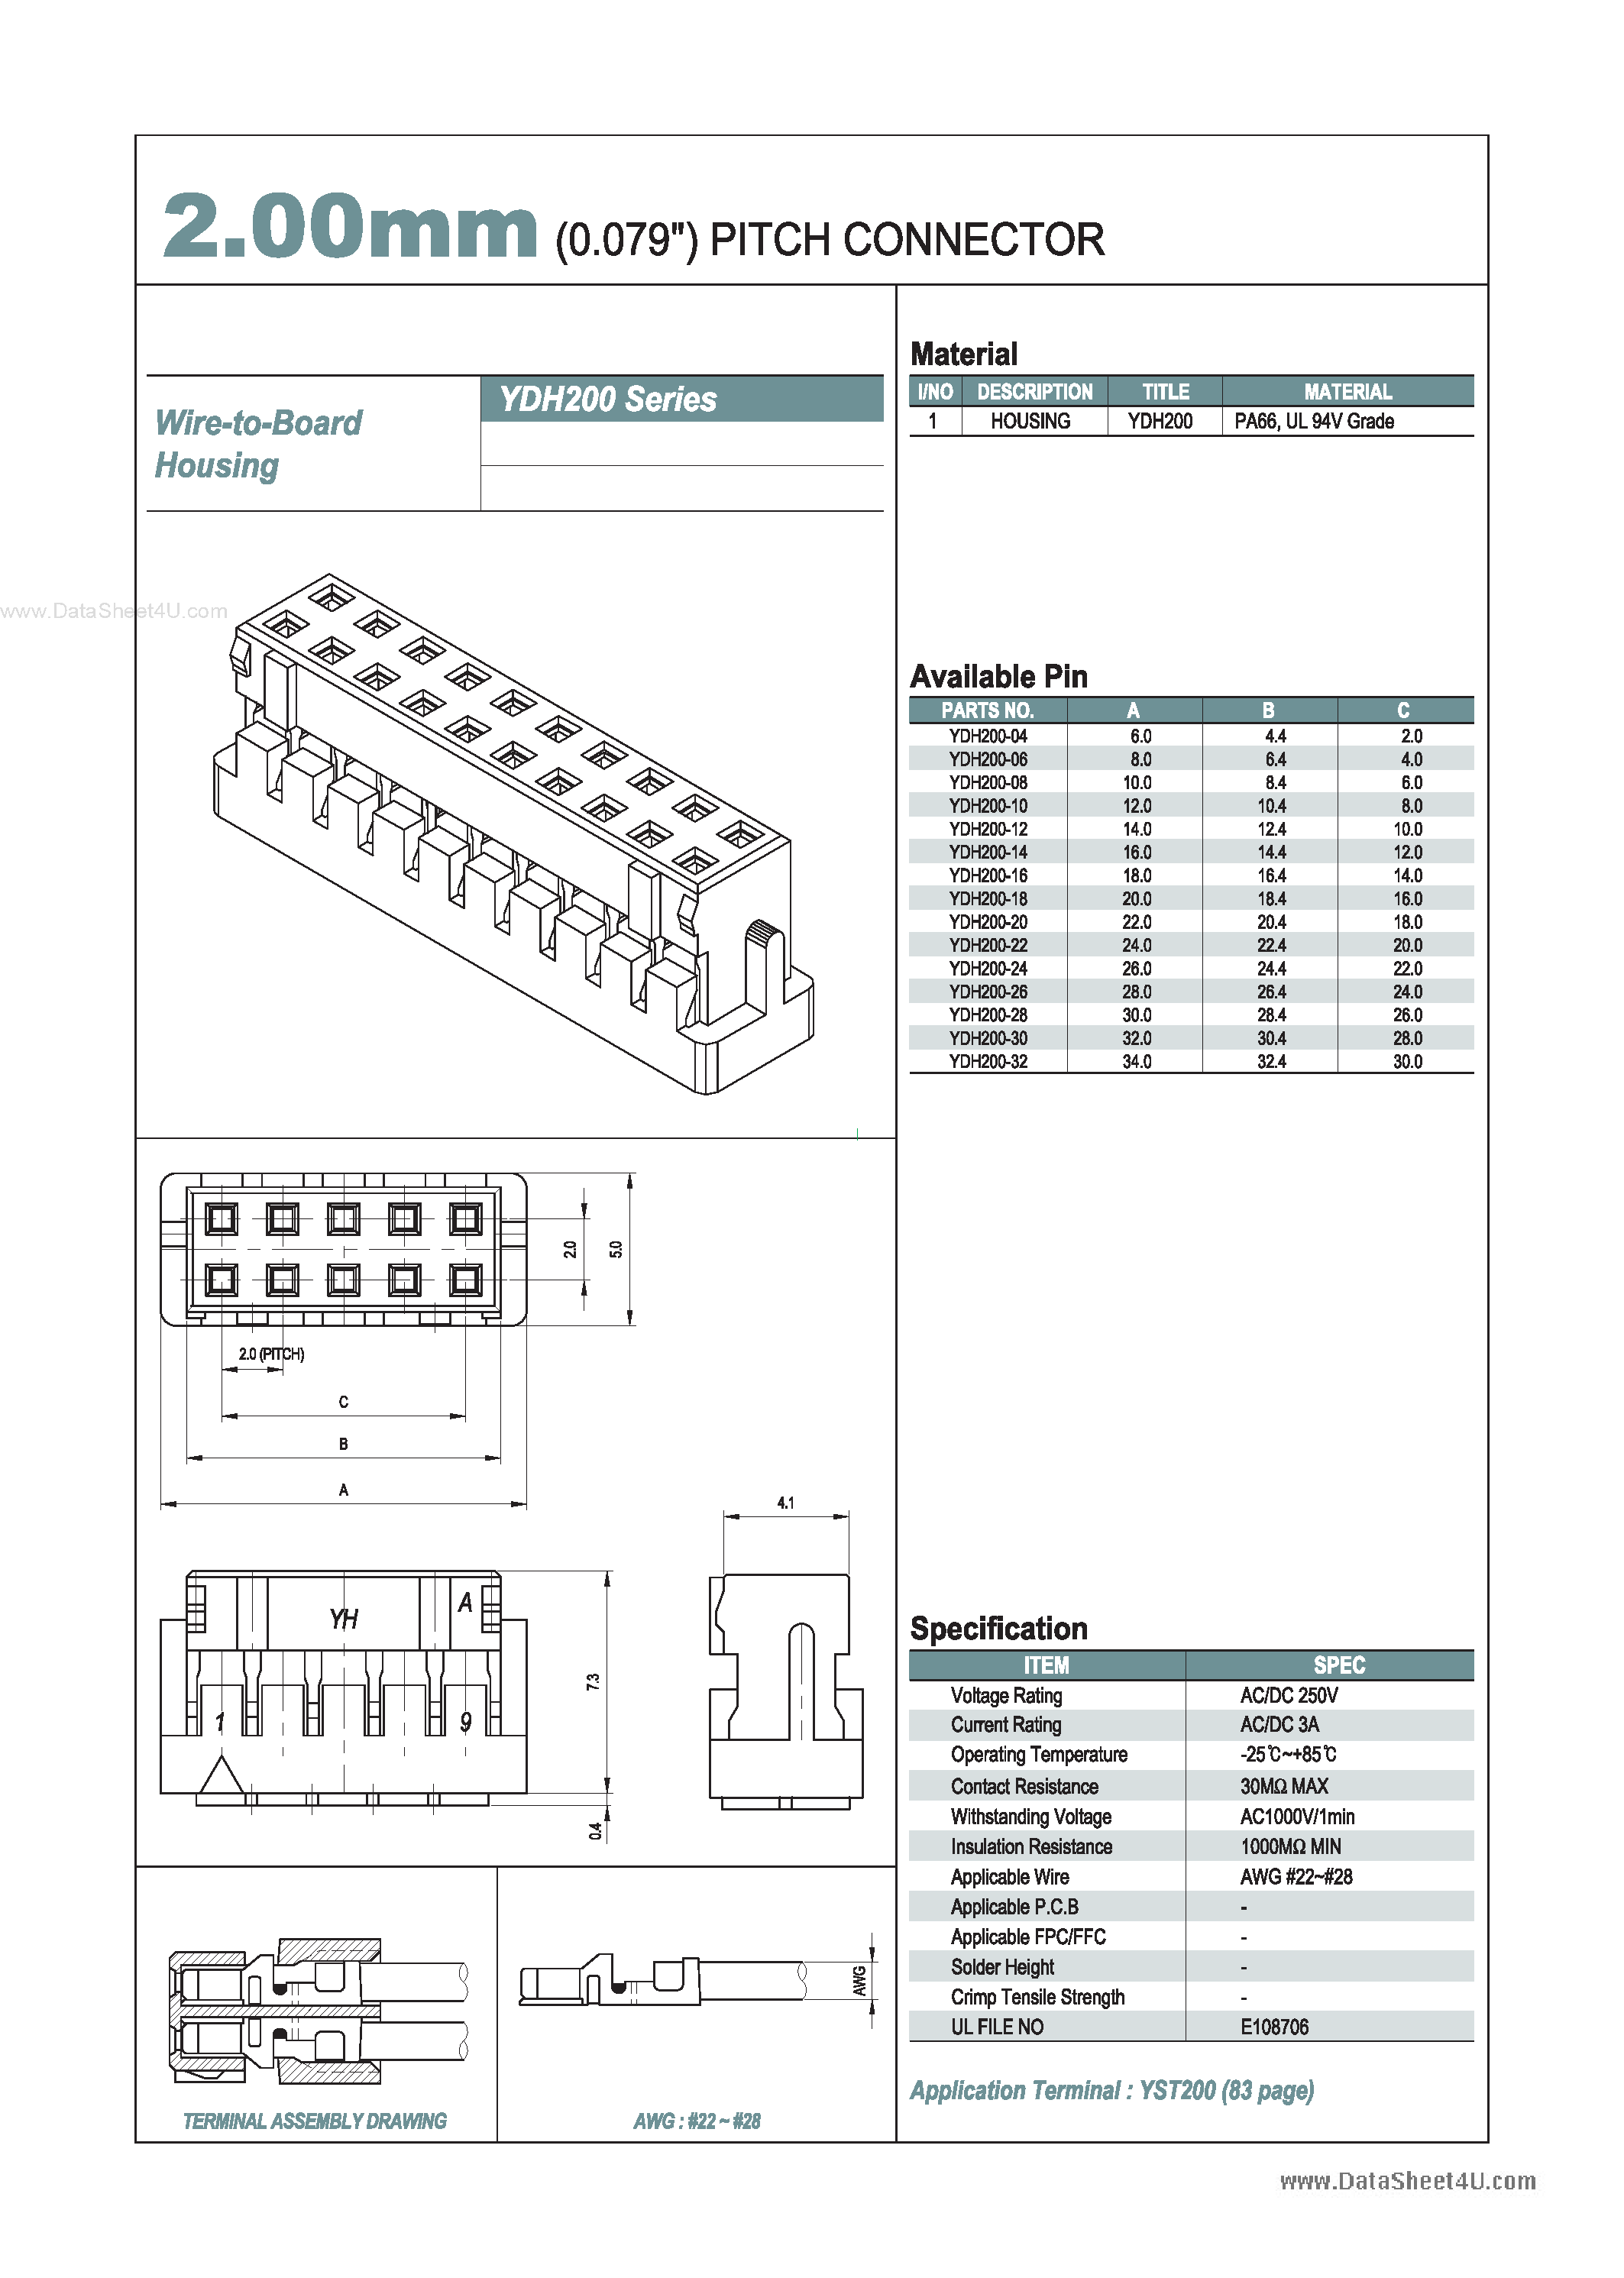 Datasheet YDH200 - 2.00mm PITCH CONNECTOR page 1